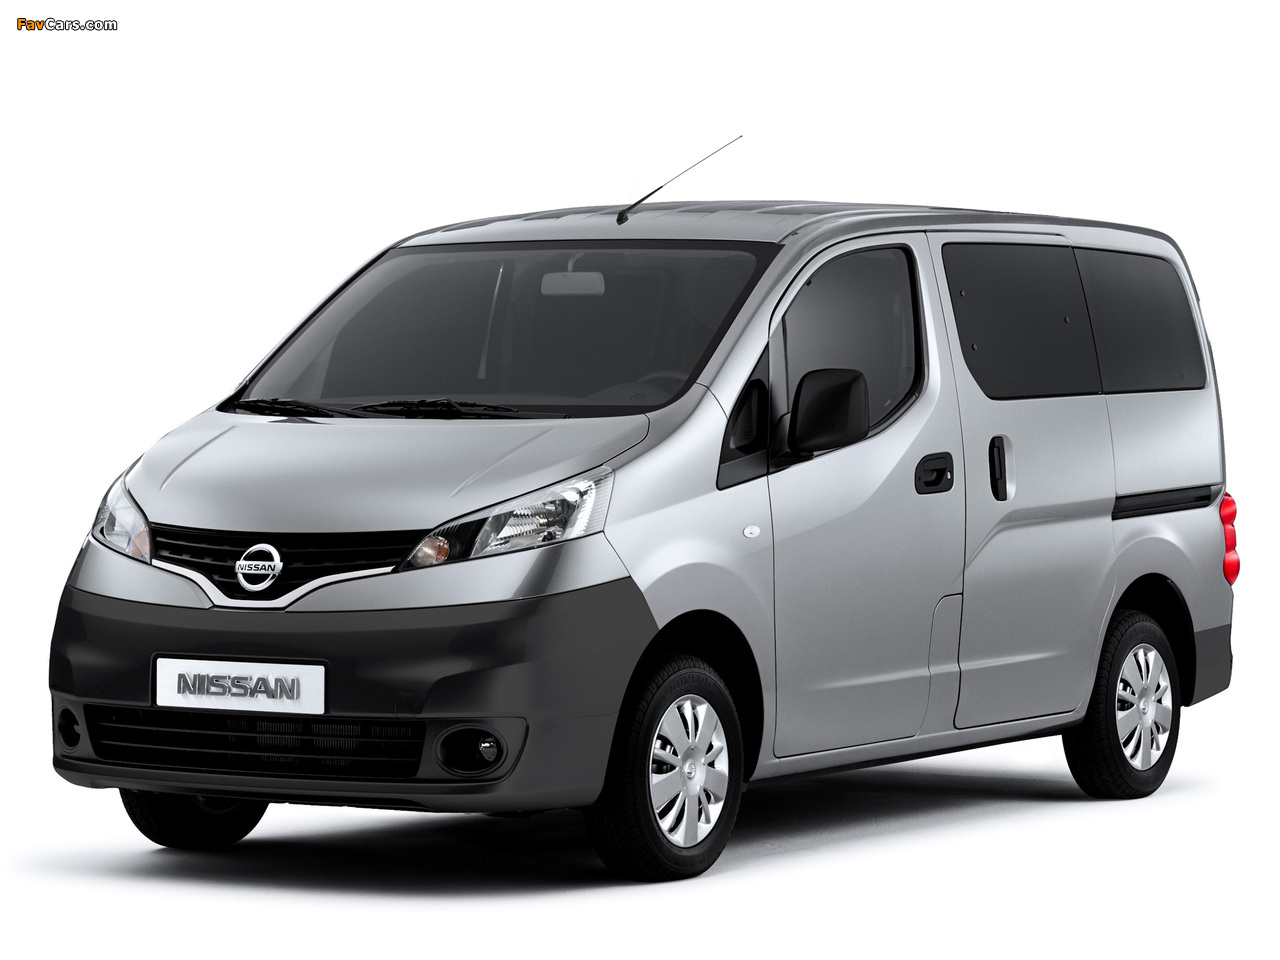 Pictures of Nissan NV200 2009 (1280 x 960)